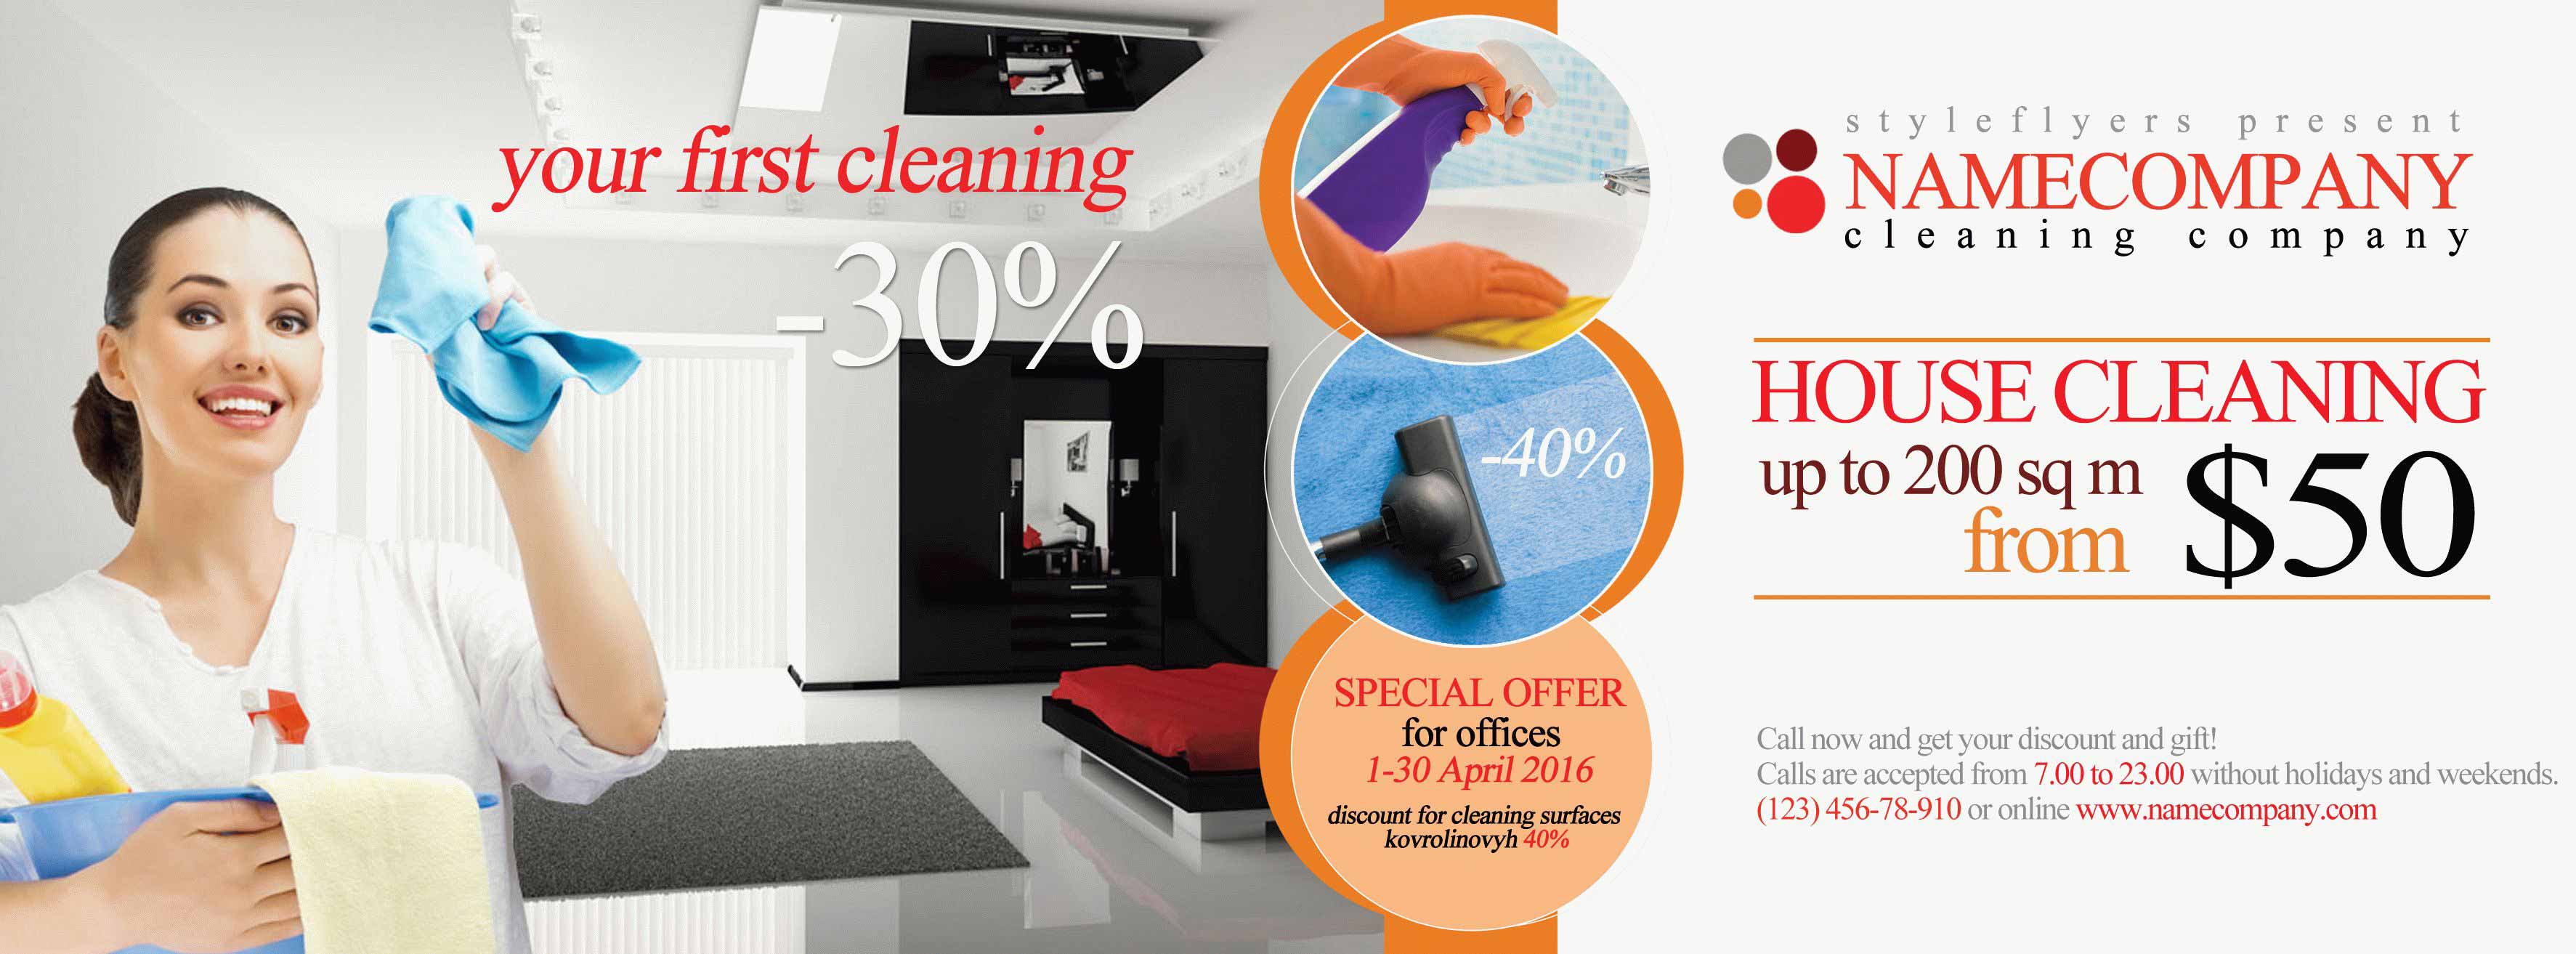 Cleaning Company PSD Flyer Template